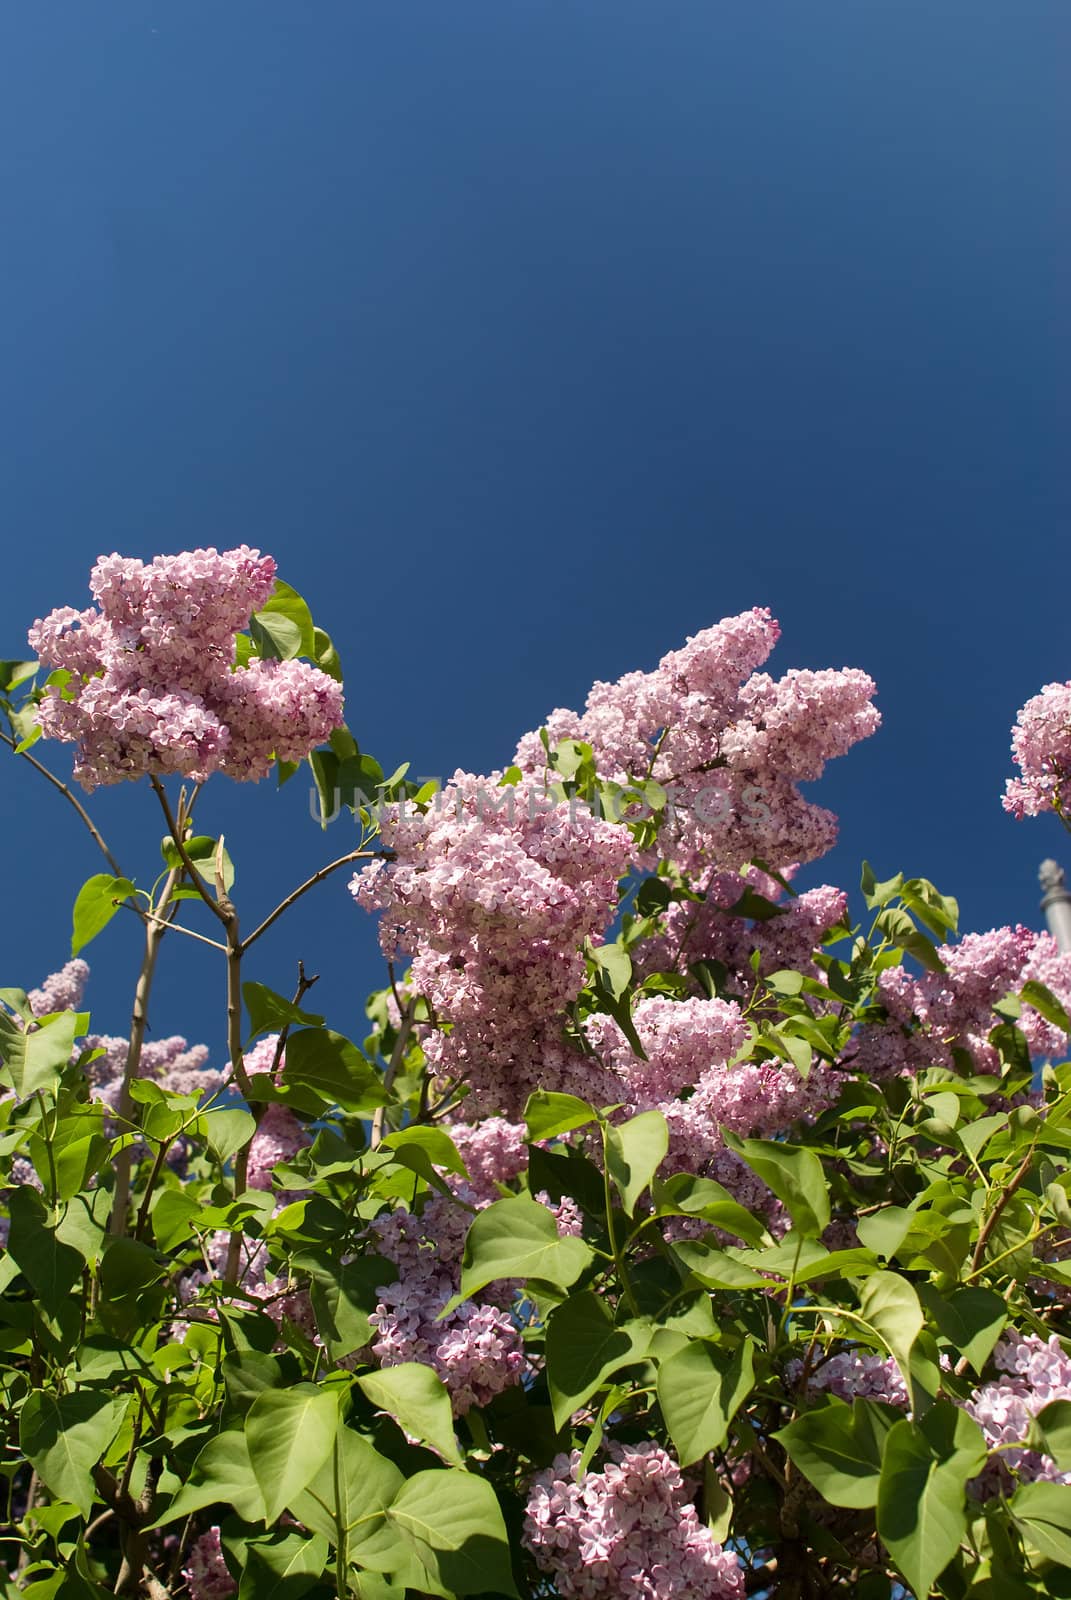 Lilac branches against blue sky by BIG_TAU